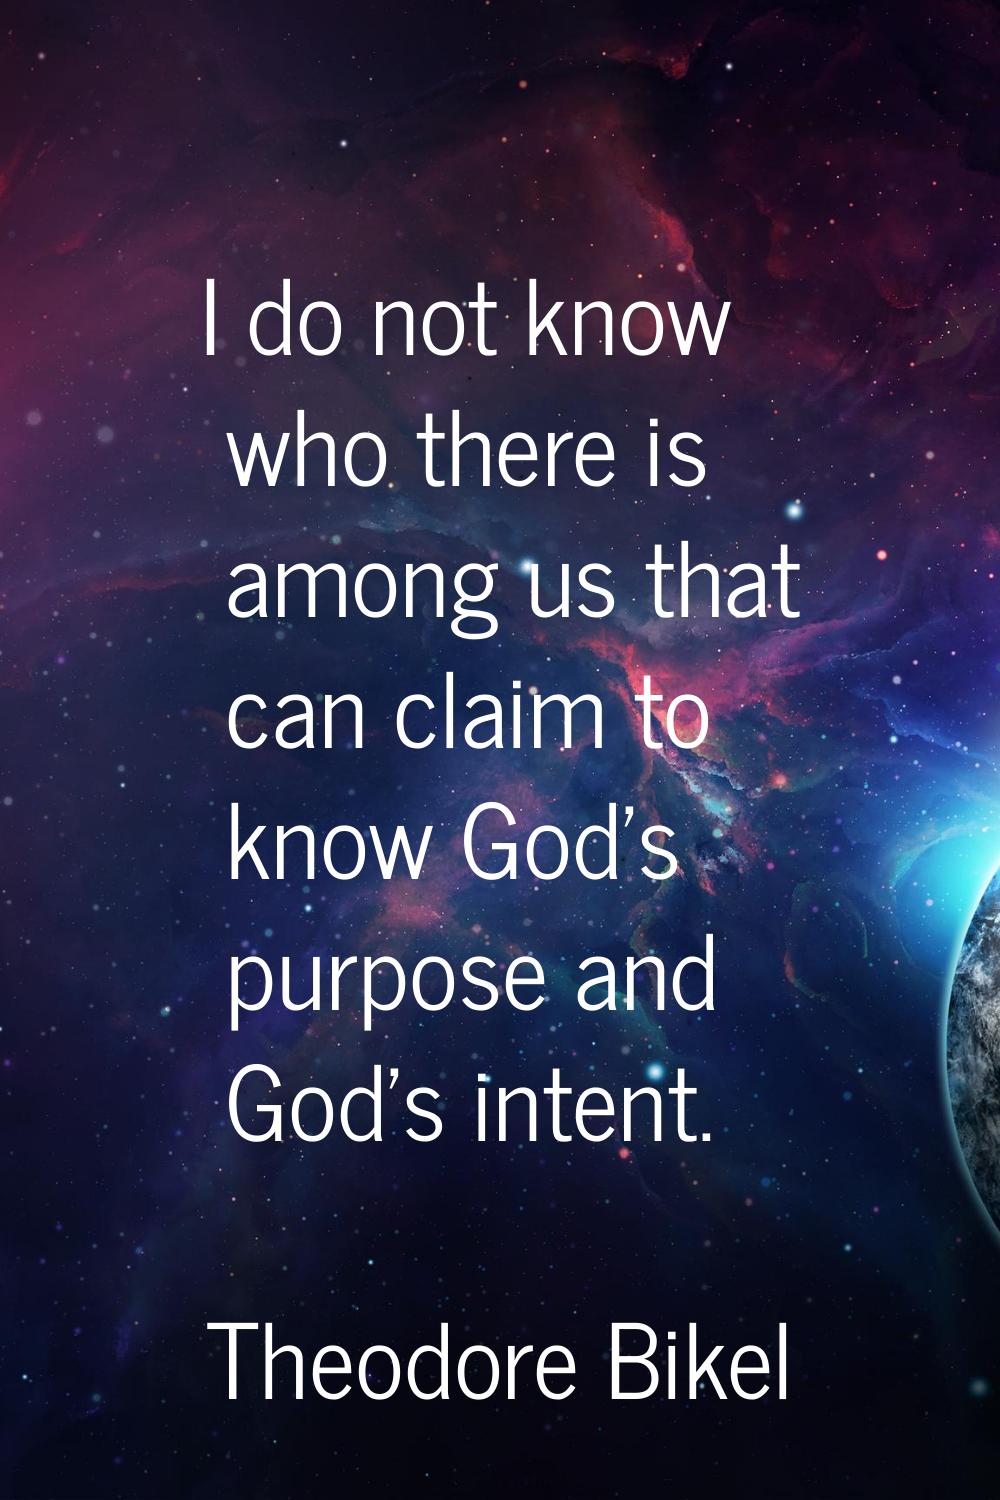 I do not know who there is among us that can claim to know God's purpose and God's intent.